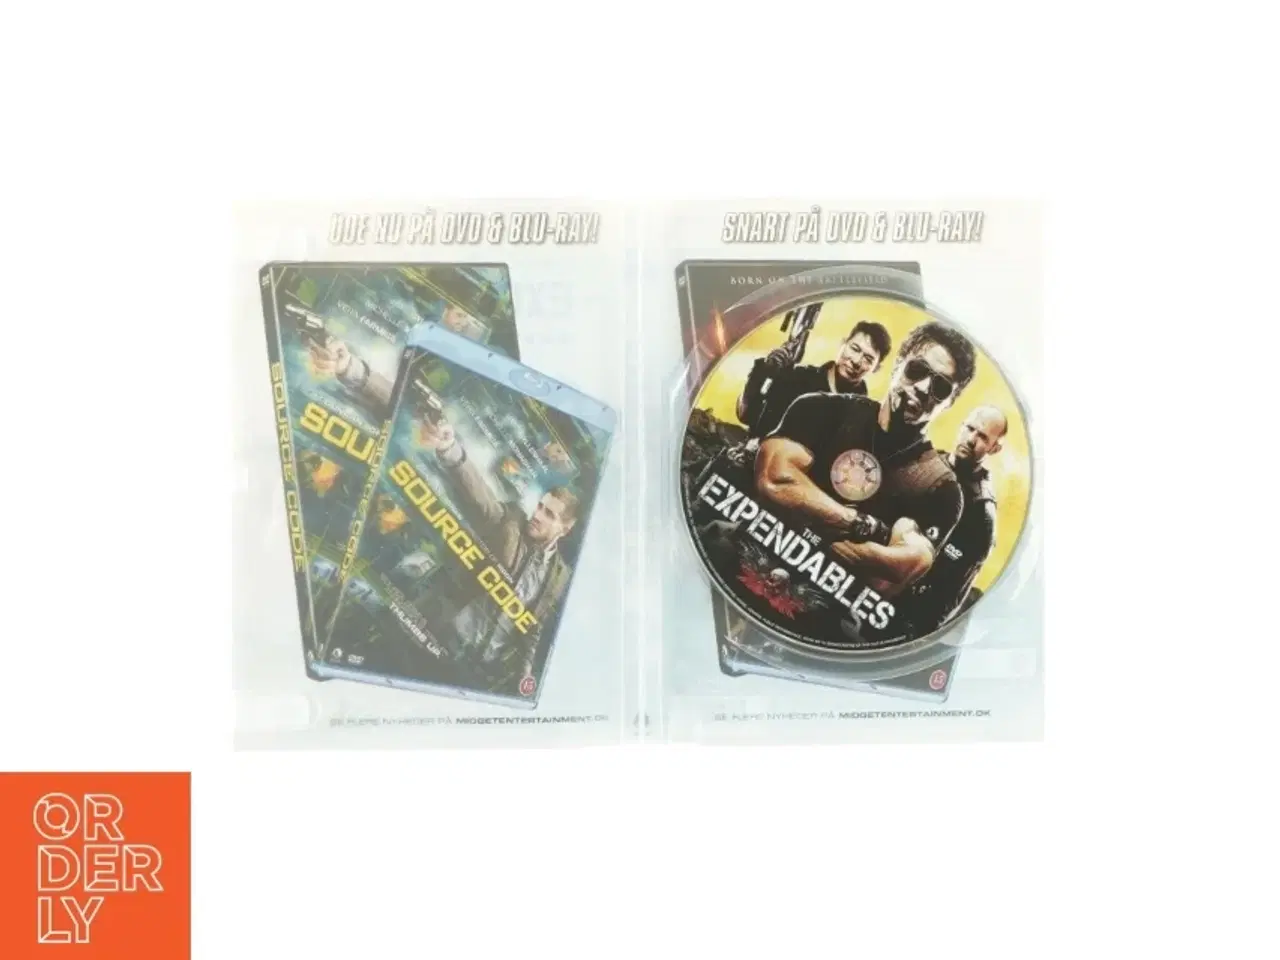 Billede 3 - The expendables (DVD)